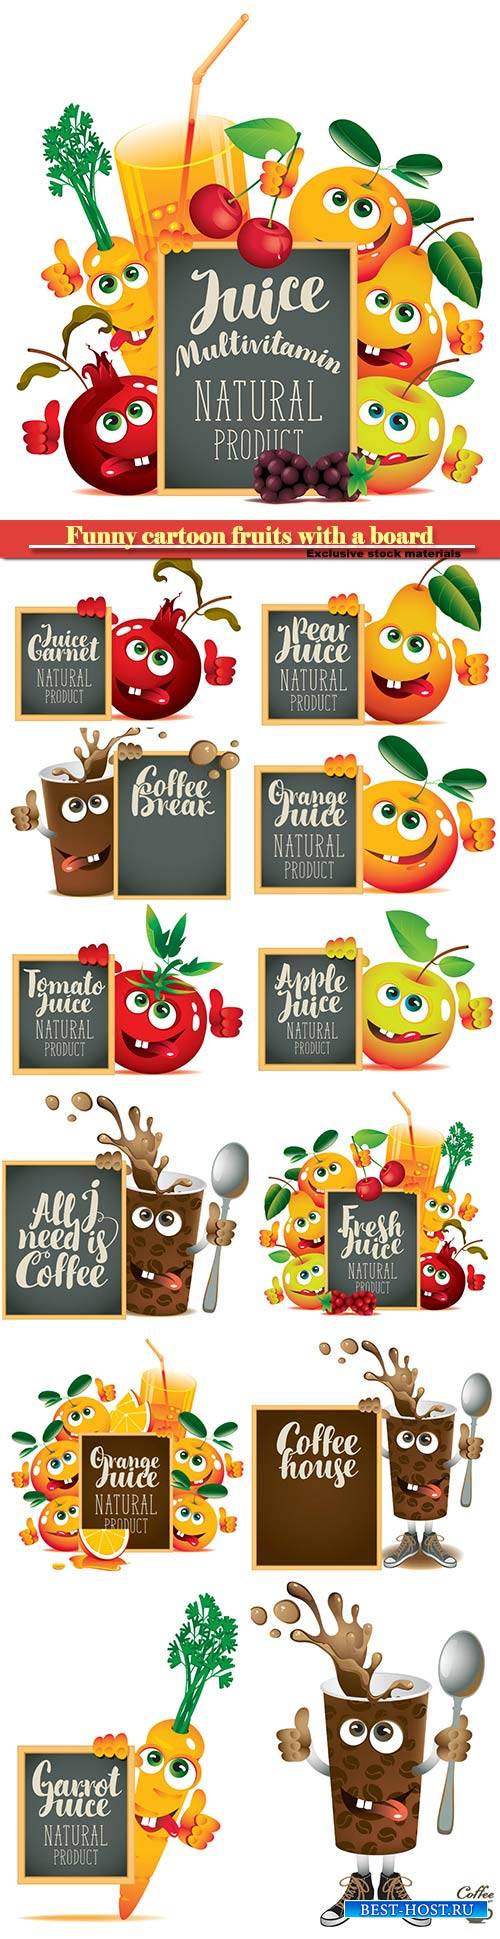 Funny cartoon fruits with a board, coffee and juices